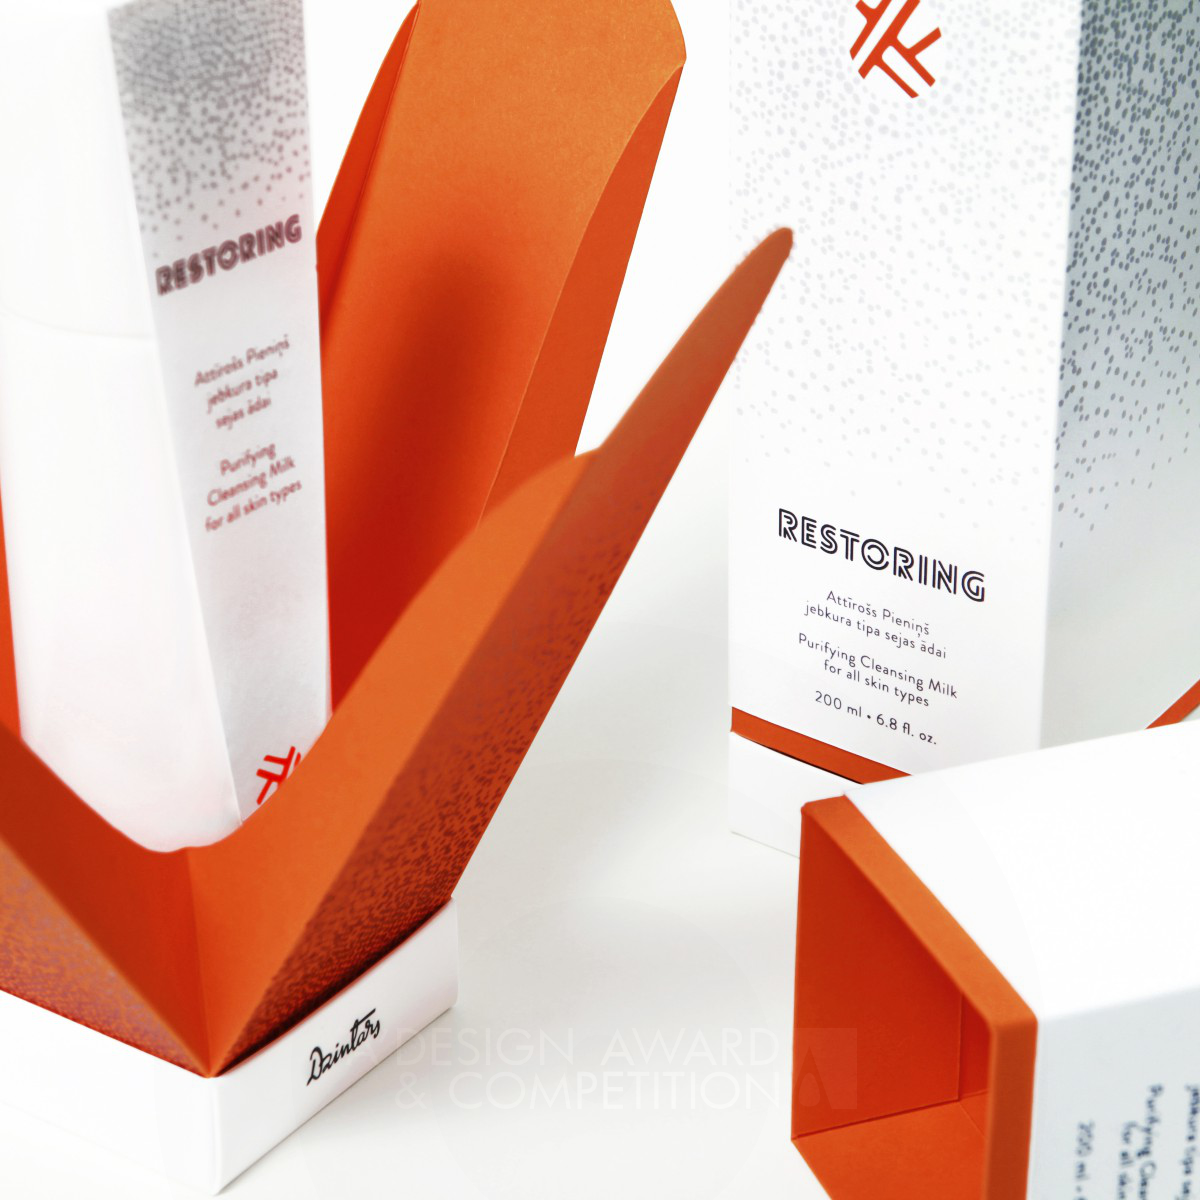 Restoring Cosmetics Packaging by Marta Gintere